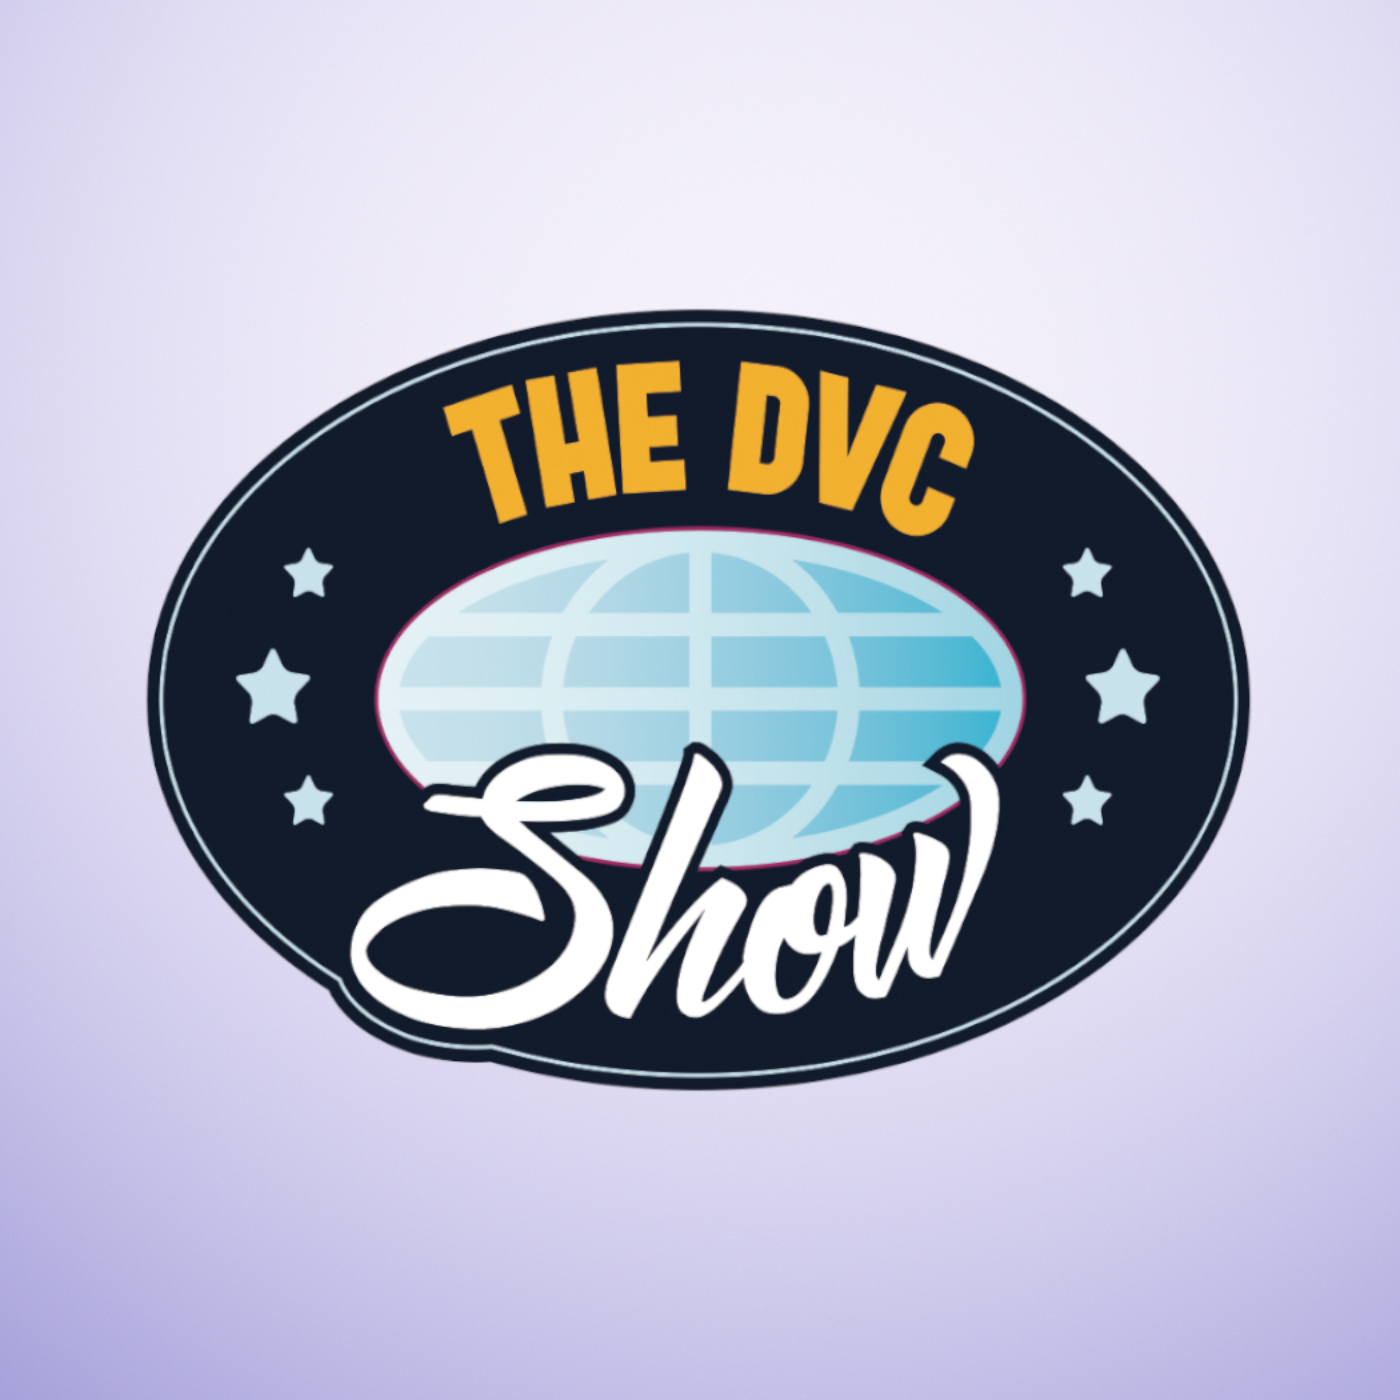 The DVC Show Podcast – 01/27/20